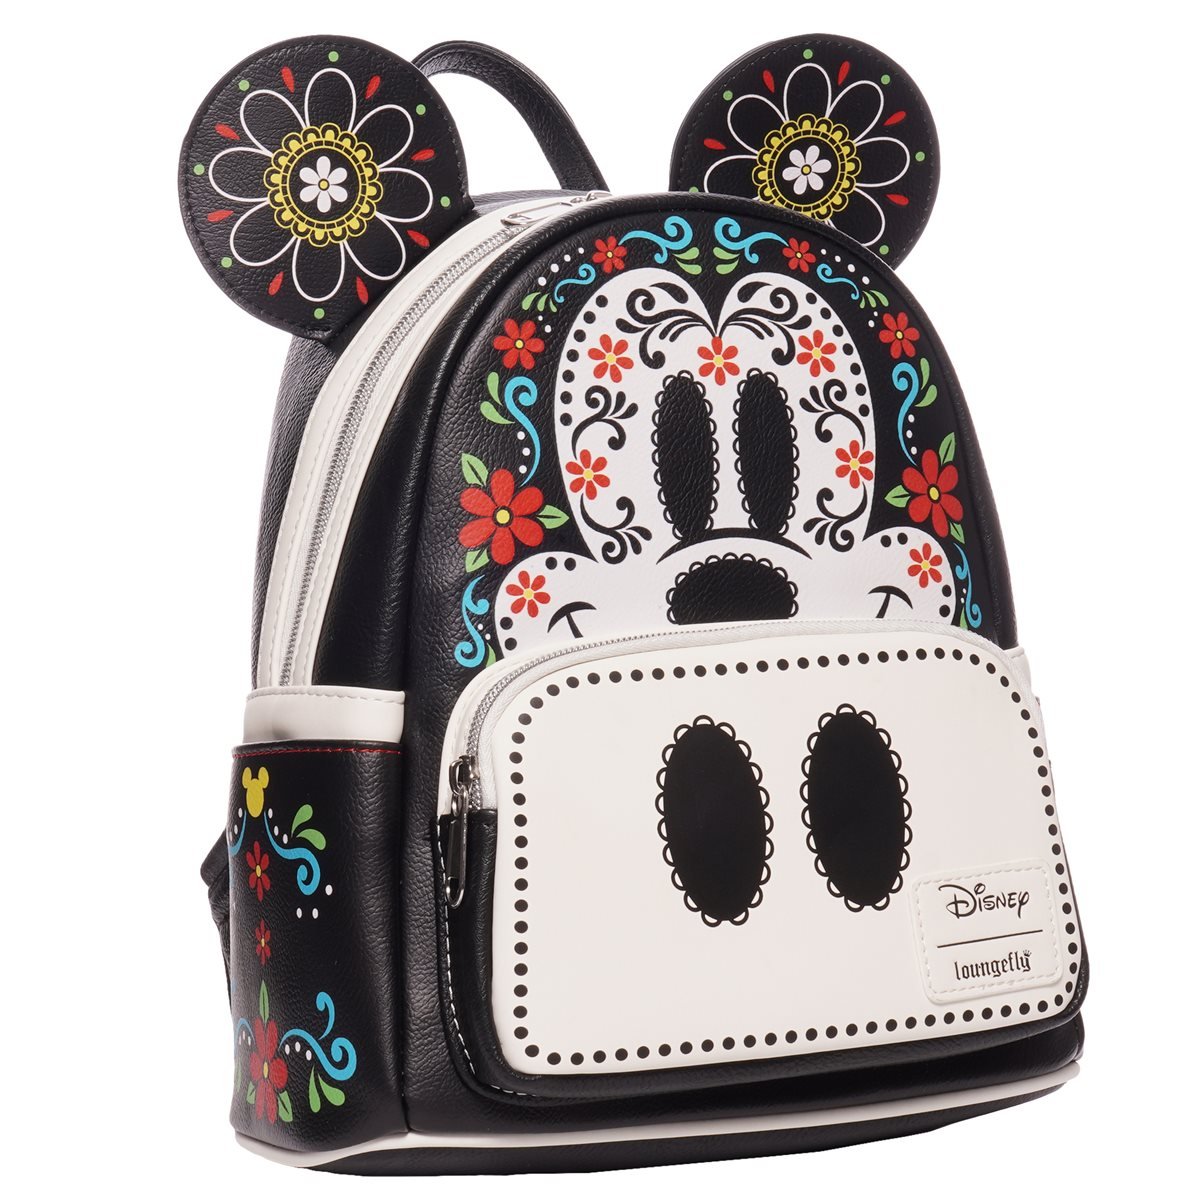 671803441897 - Loungefly Disney Mickey Mouse Dia de los Muertos Sugar Skull Mini Backpack - Entertainment Earth Ex - Alternate Side View